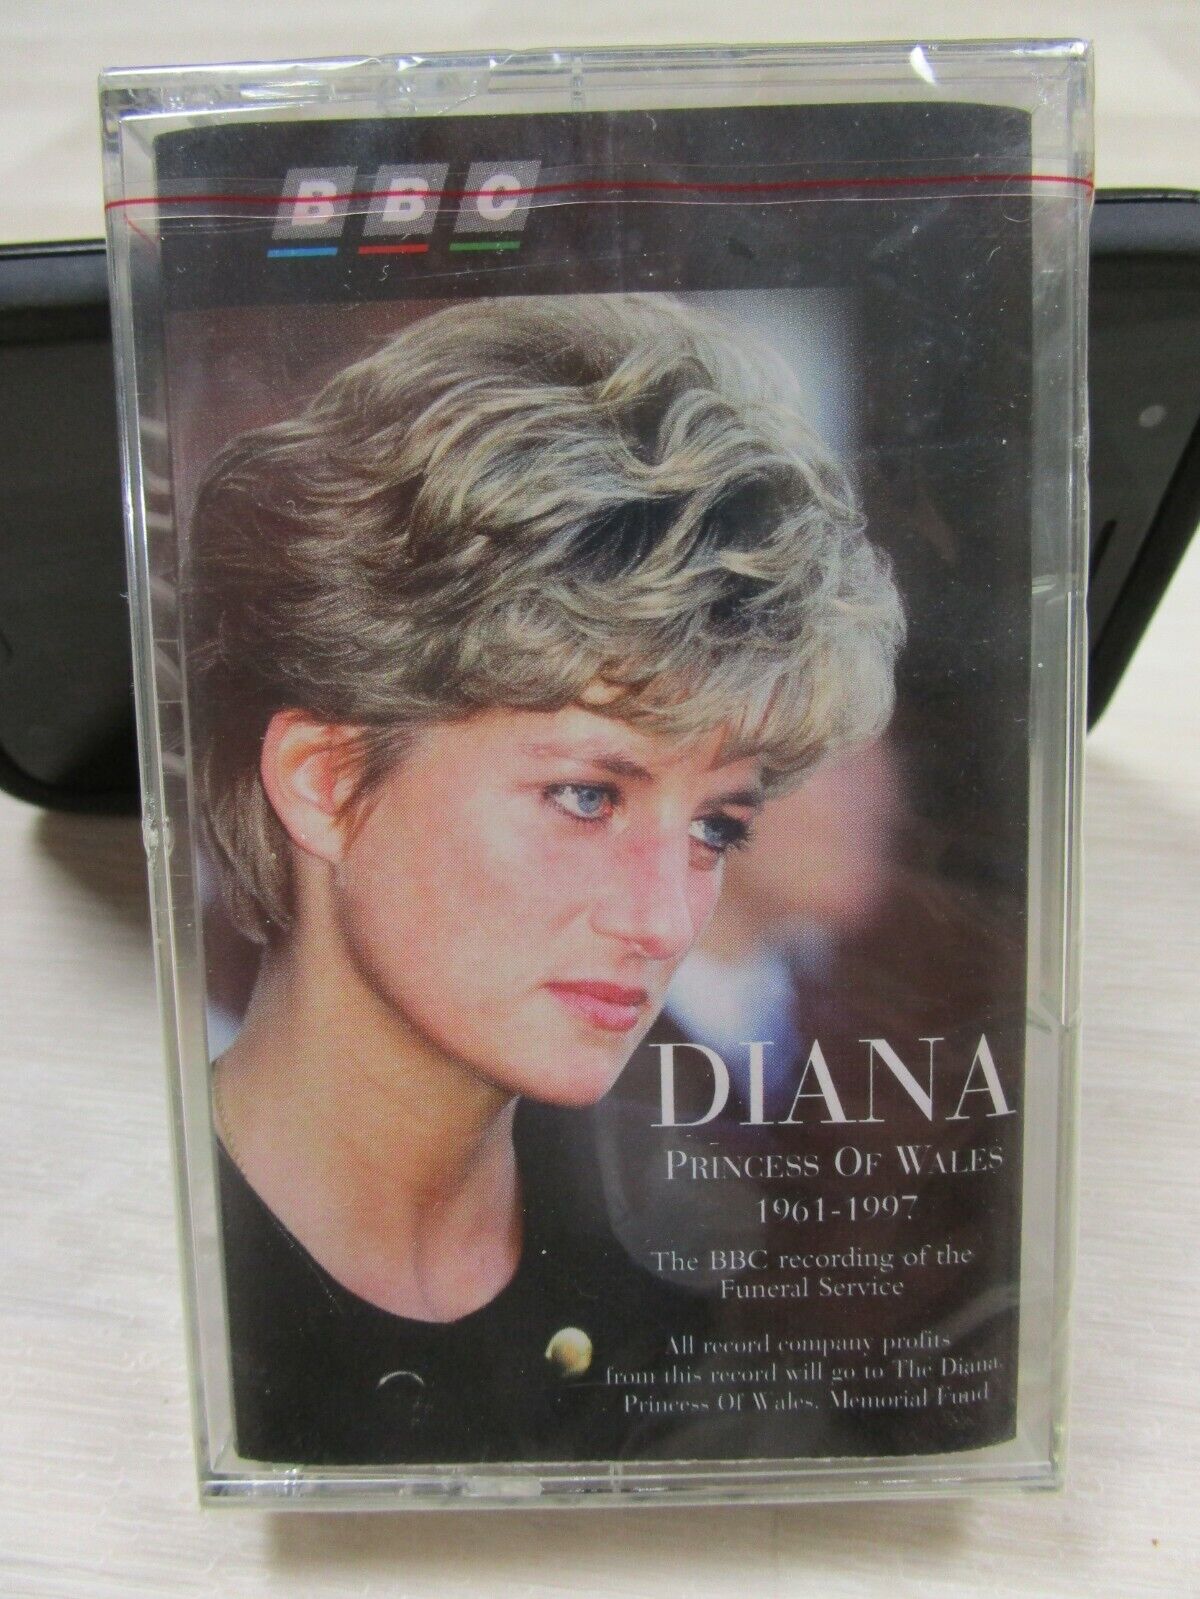 VTG Diana Princess of Wales Sealed BBC Recording Funeral Service Cassette Tape 